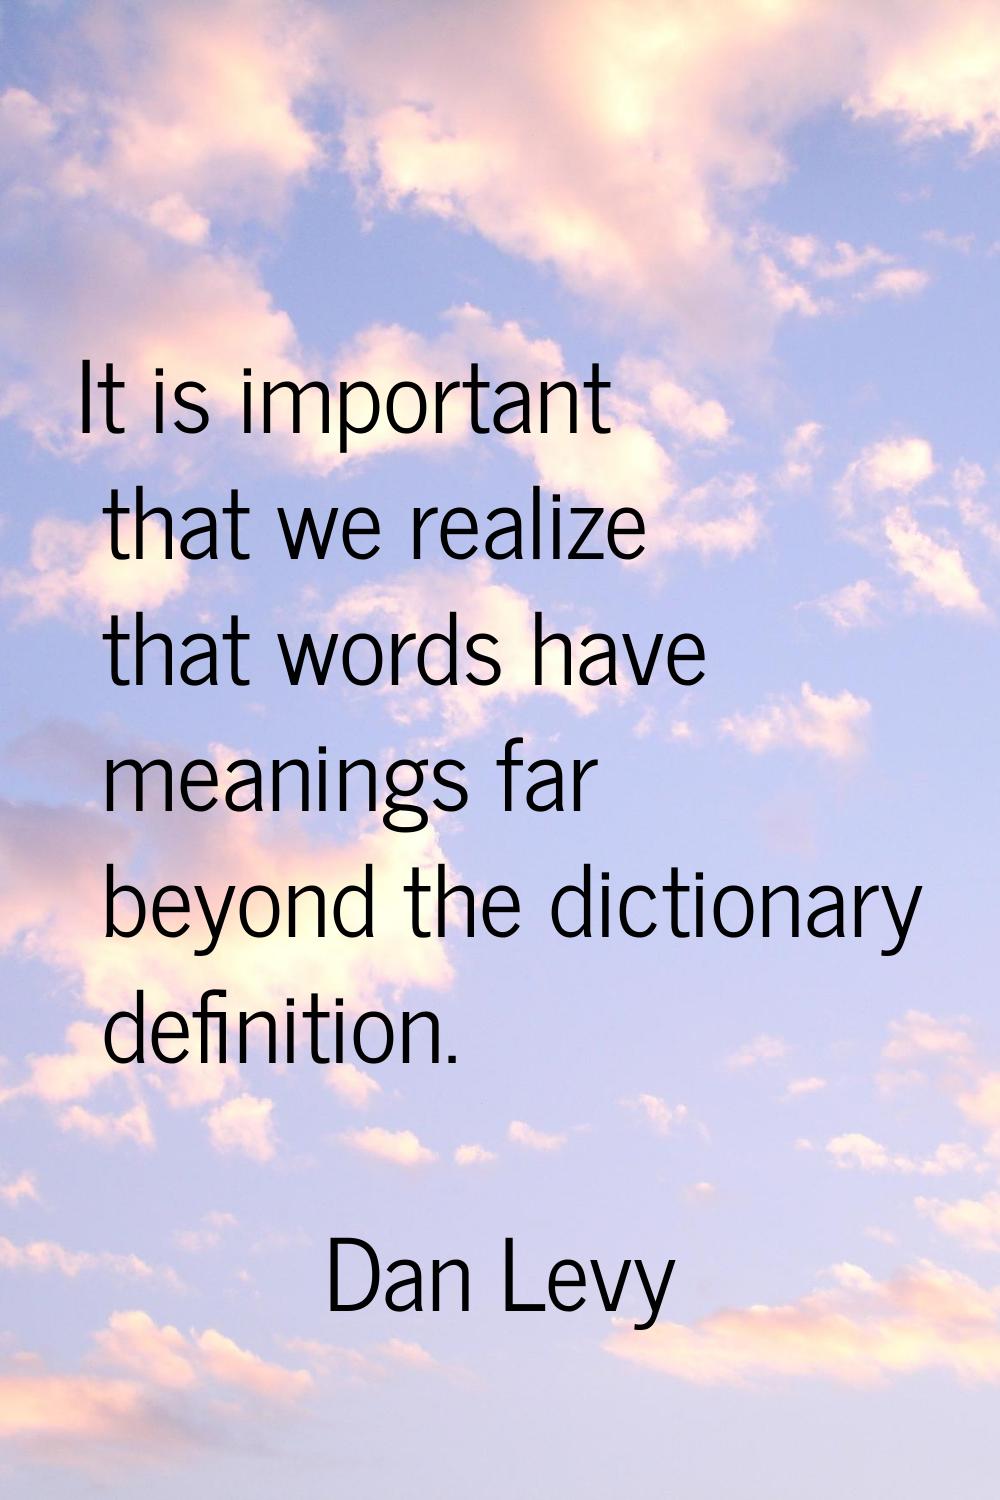 It is important that we realize that words have meanings far beyond the dictionary definition.